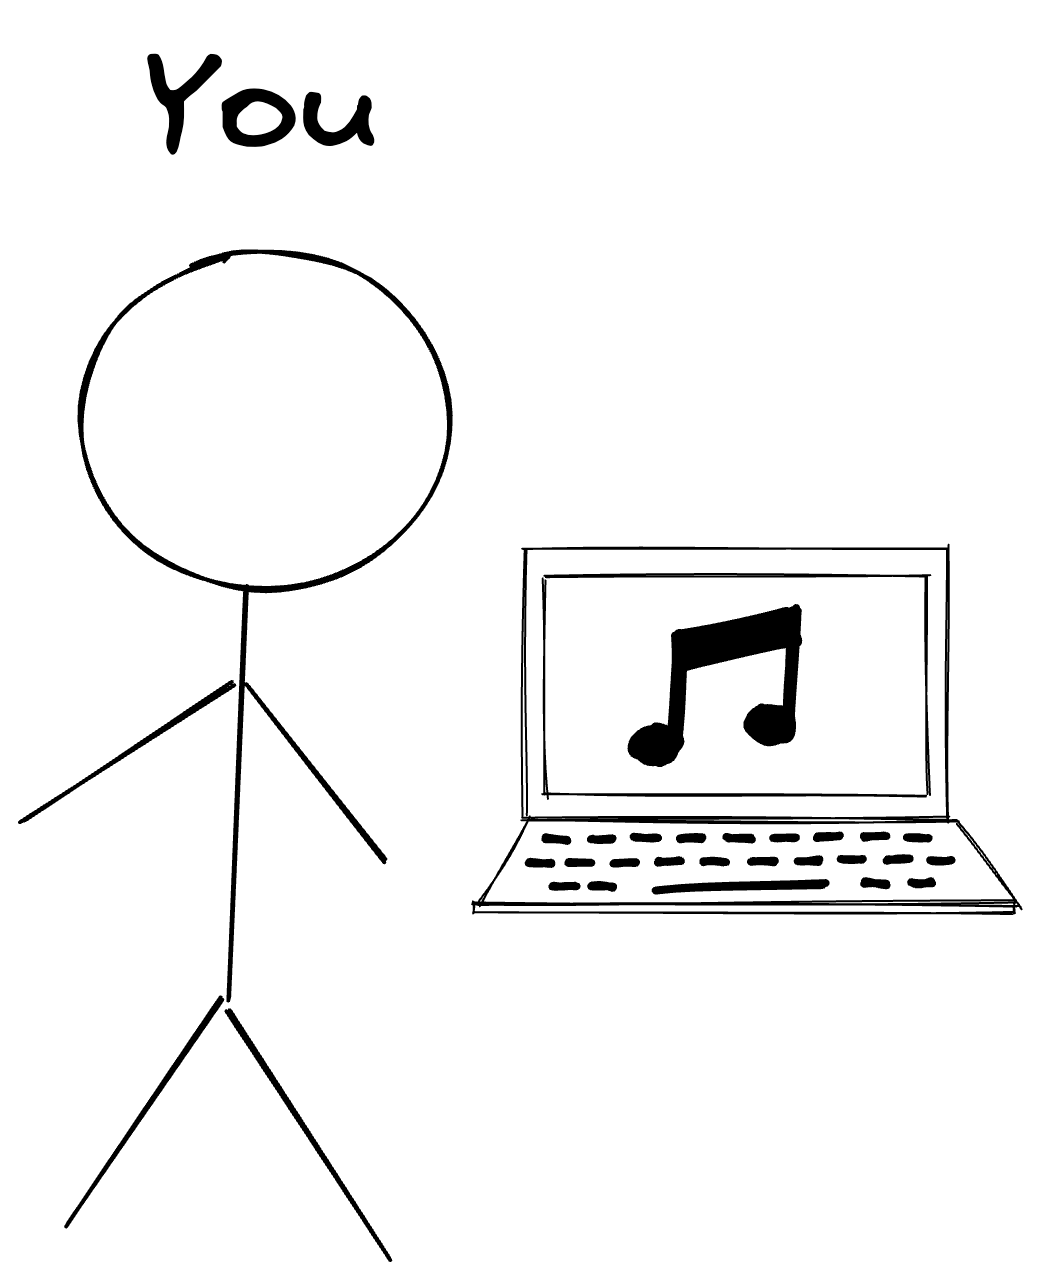 Sketch of a stick figure labeled you next to an open laptop floating in the air next to the stick figure. Two eighth notes are pictured on the screen.